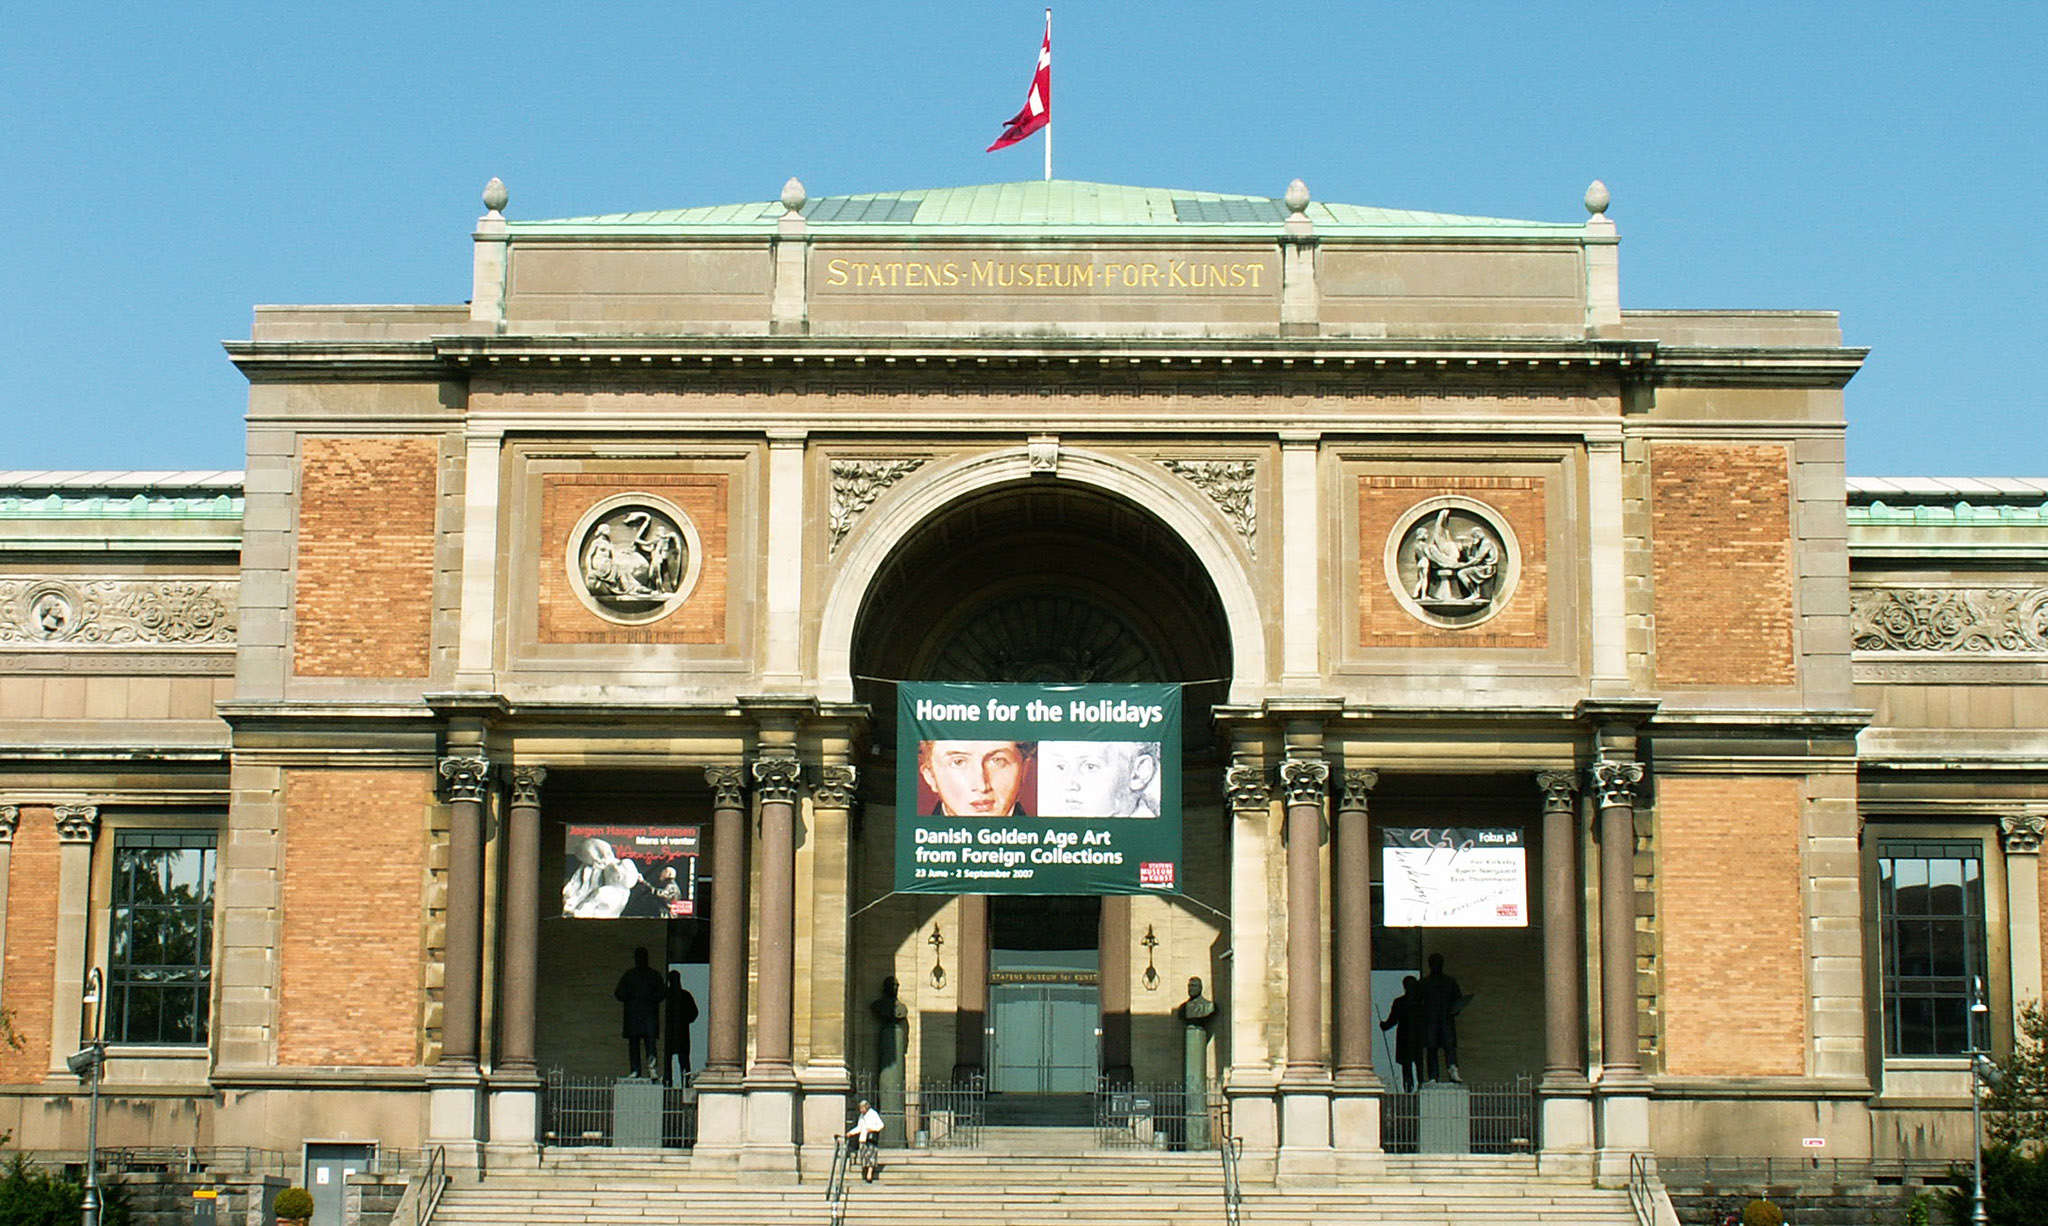 National Gallery of Art (Statens Museum for Kunst)